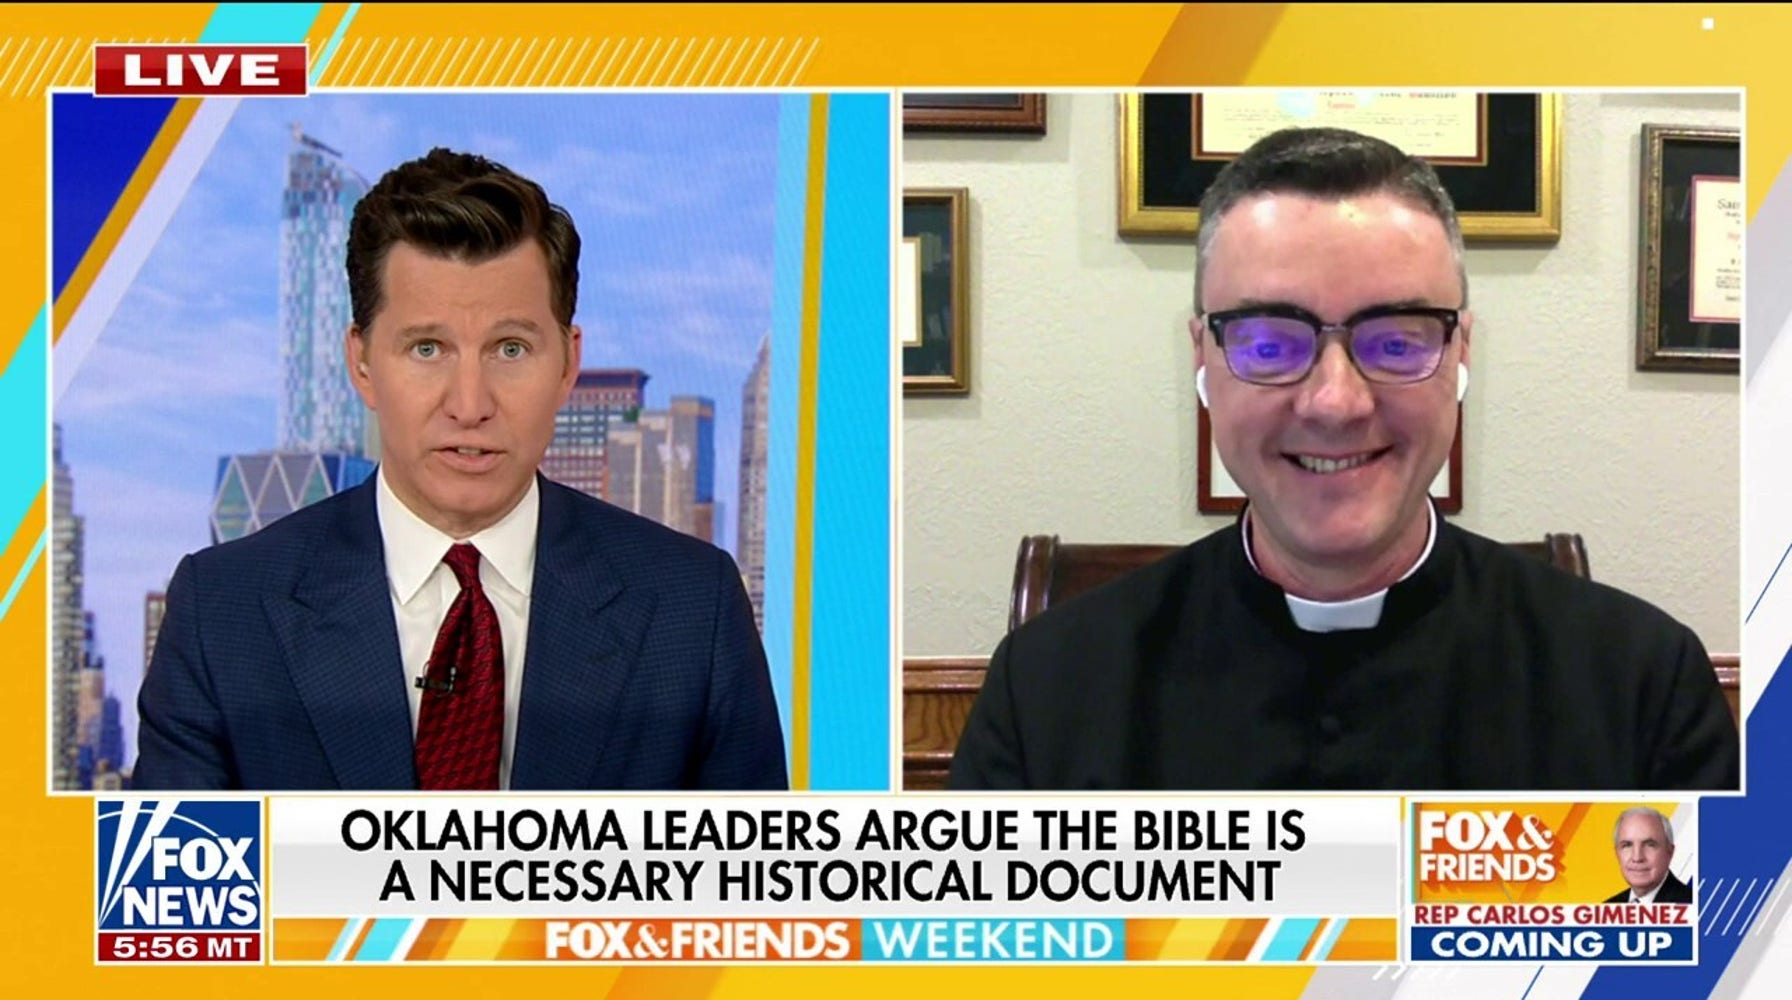 Oklahoma Policy Embraces the Bible as a Historical Document